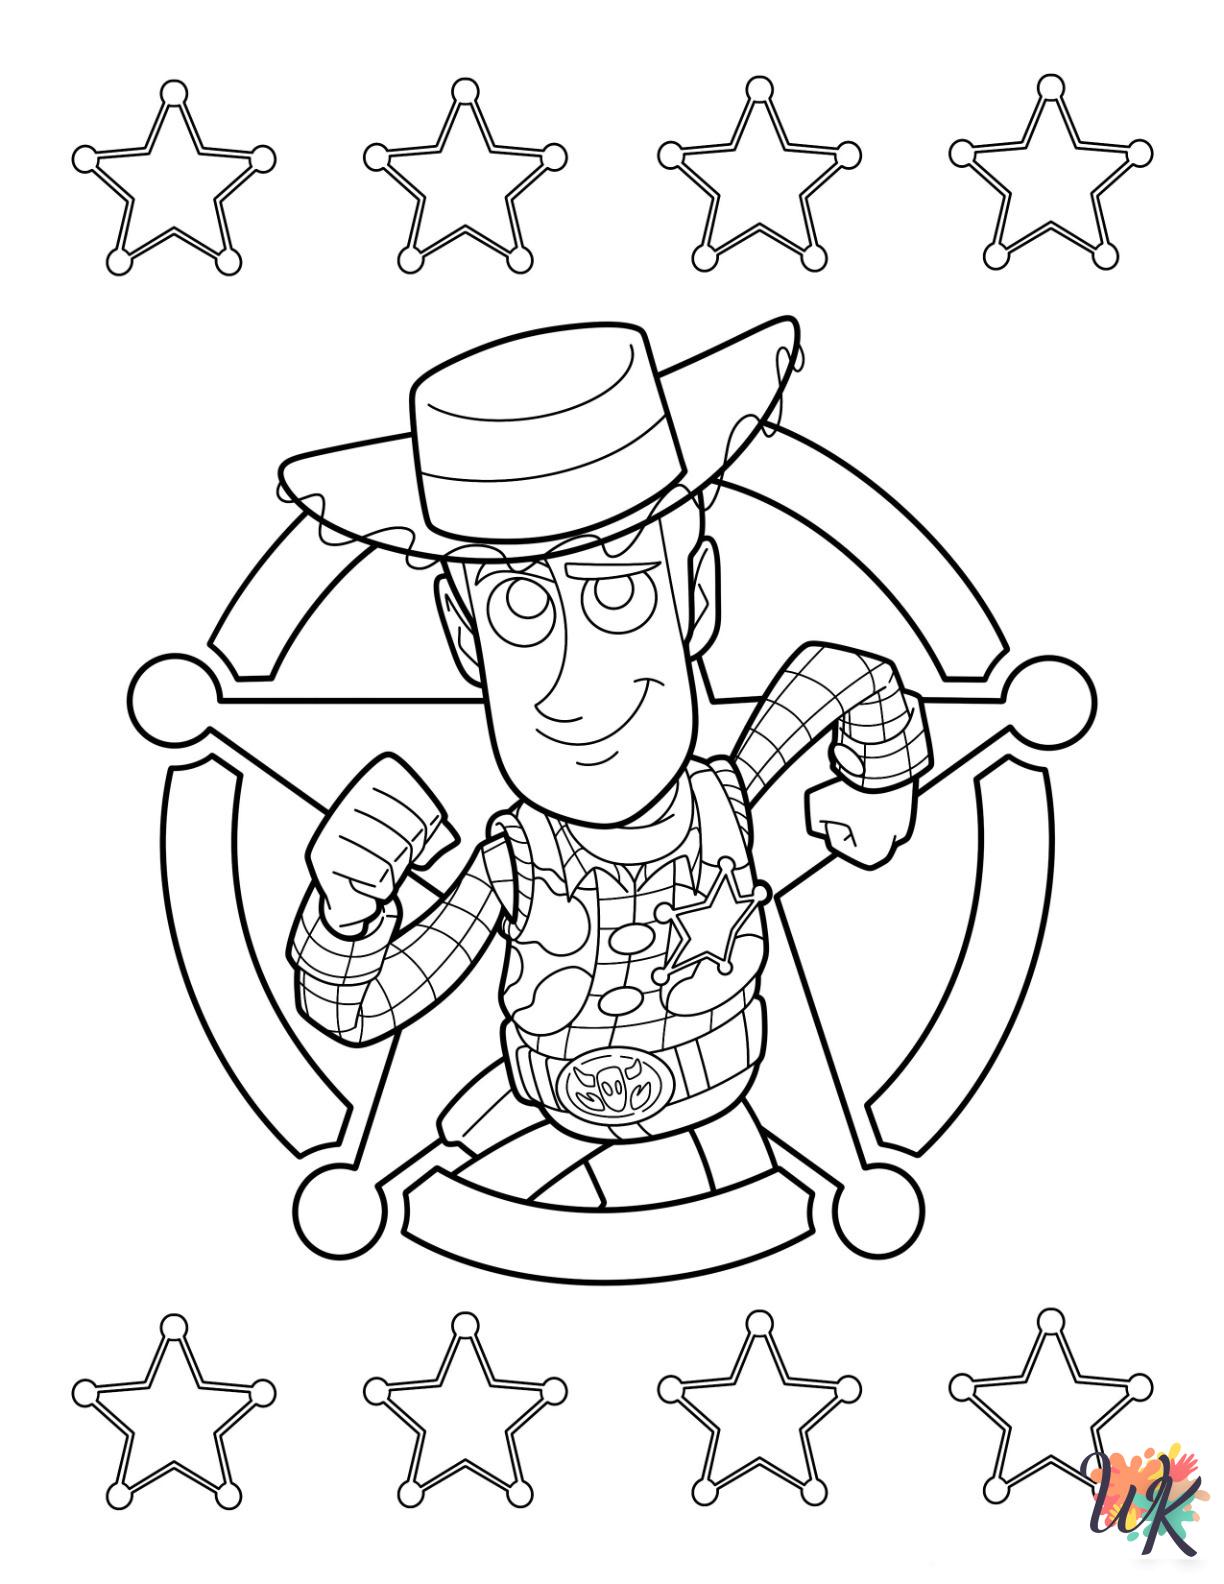 Woody decorations coloring pages